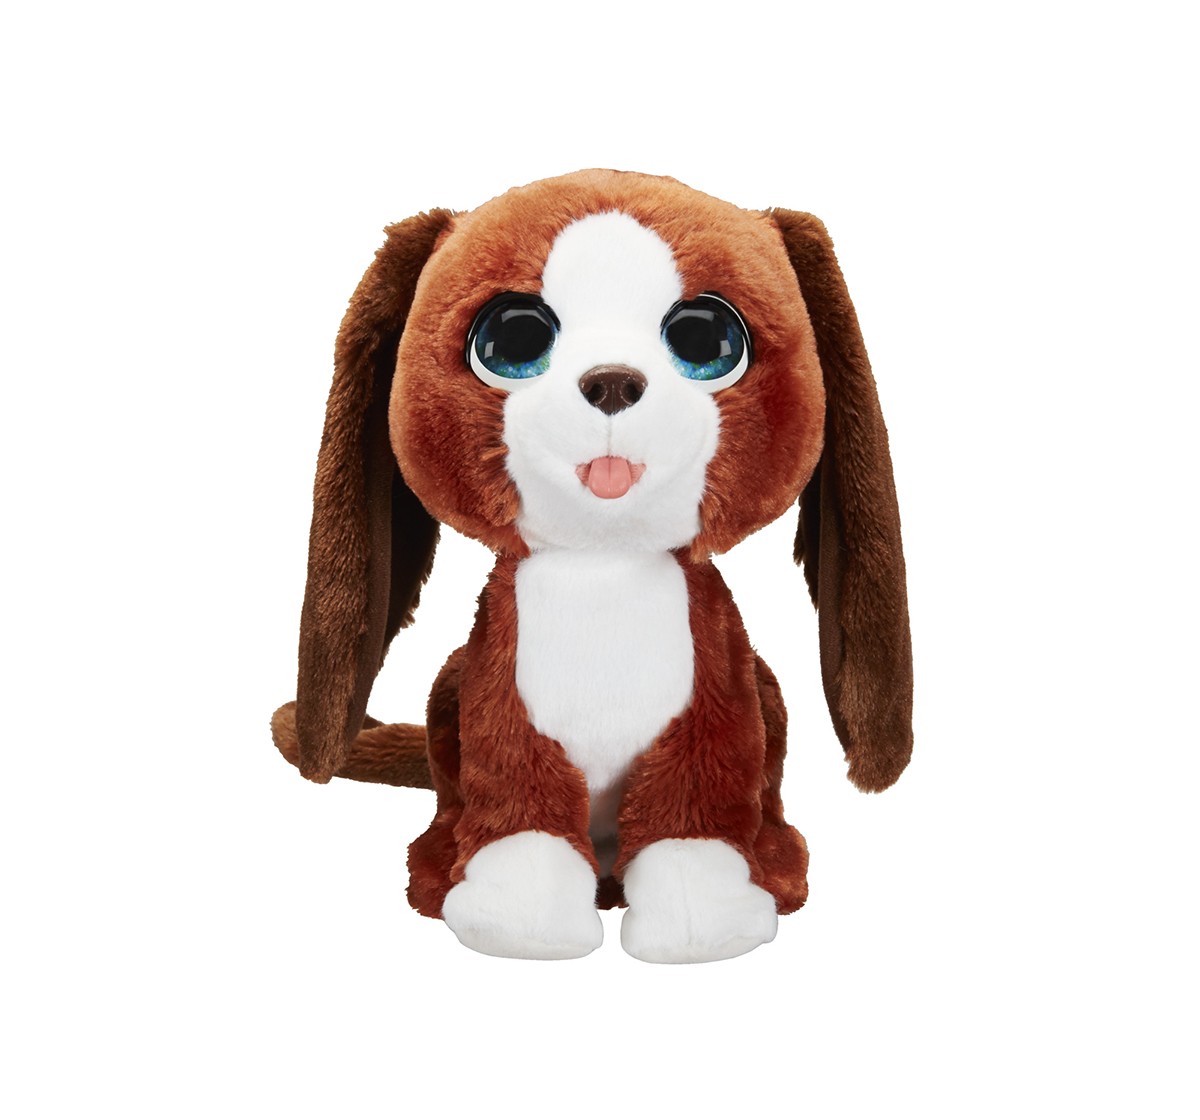 Furreal Friends Howlin’ Howie Interactive Plush Pet Toy Interactive Soft Toys for Kids age 4Y+ - 27.94 Cm 